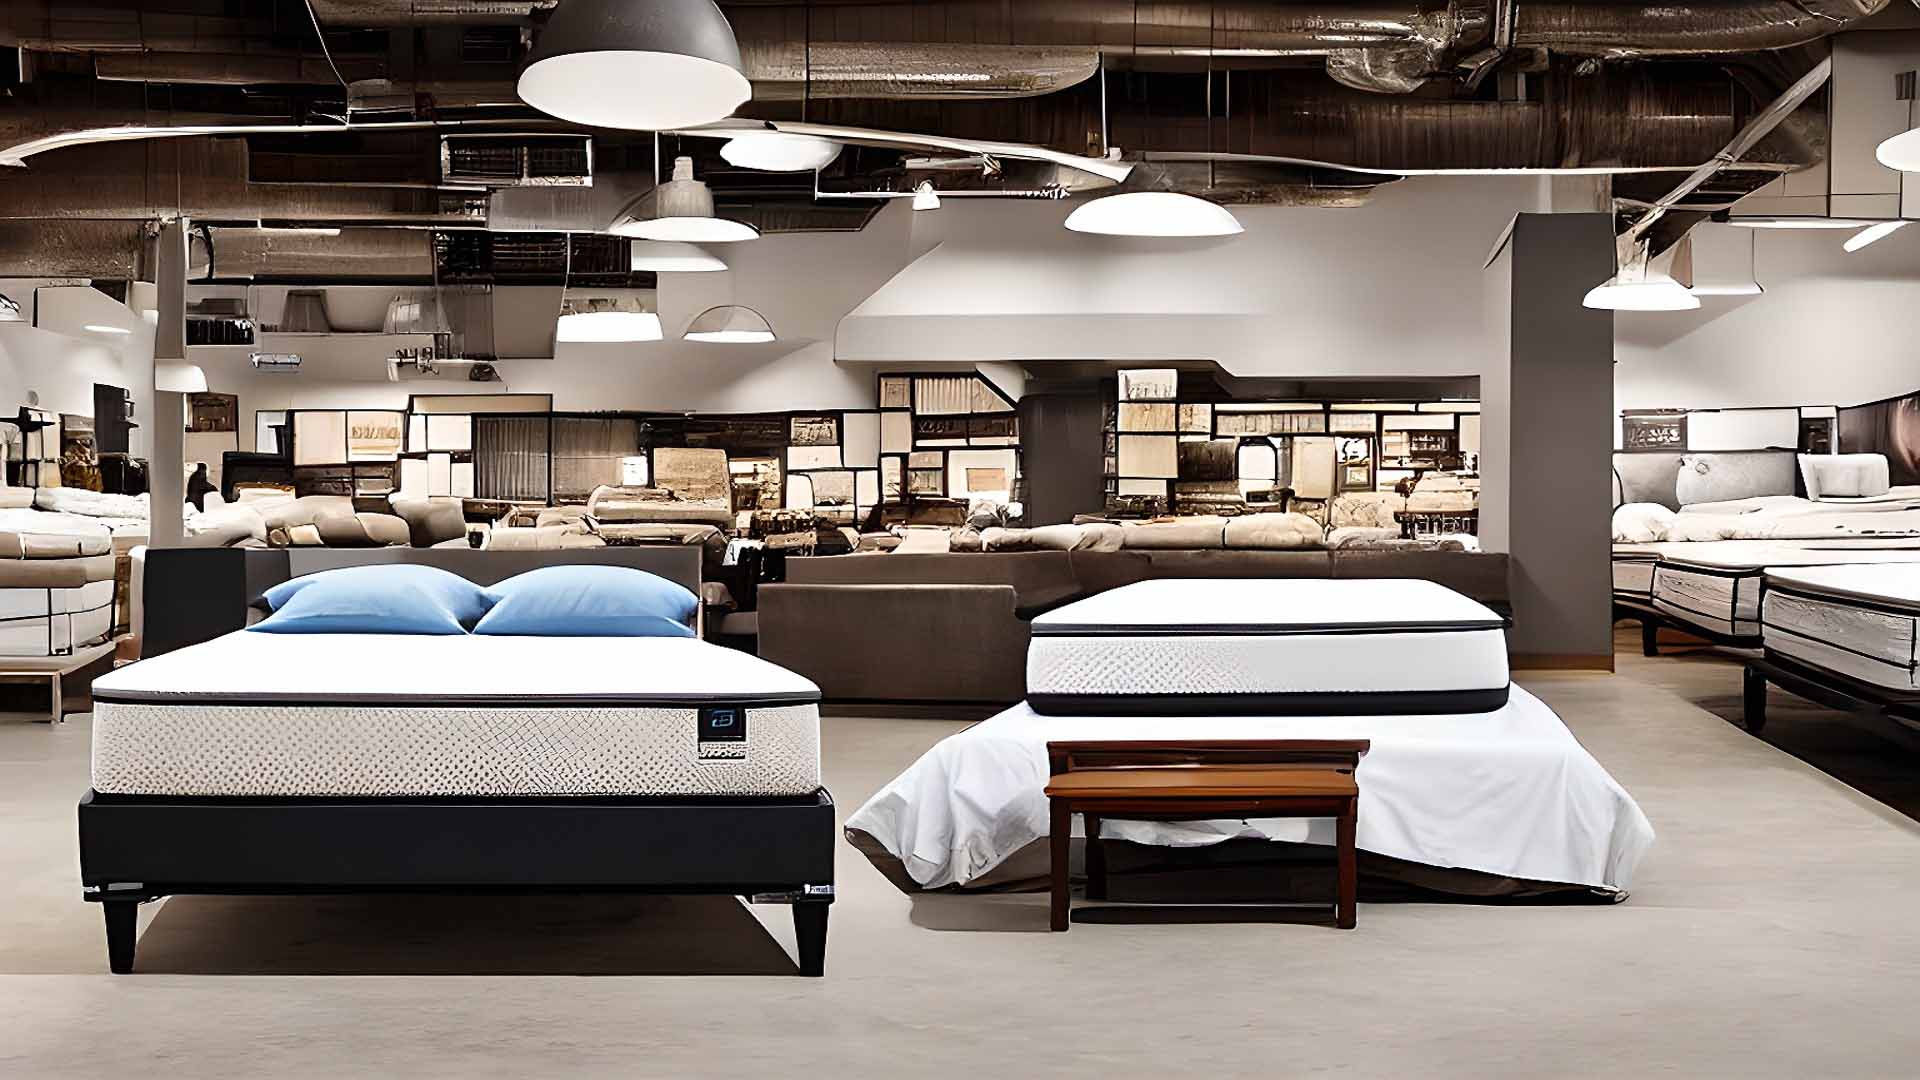 Mattress Outlet Showroom With Queen Beds Hoffman Estates, IL